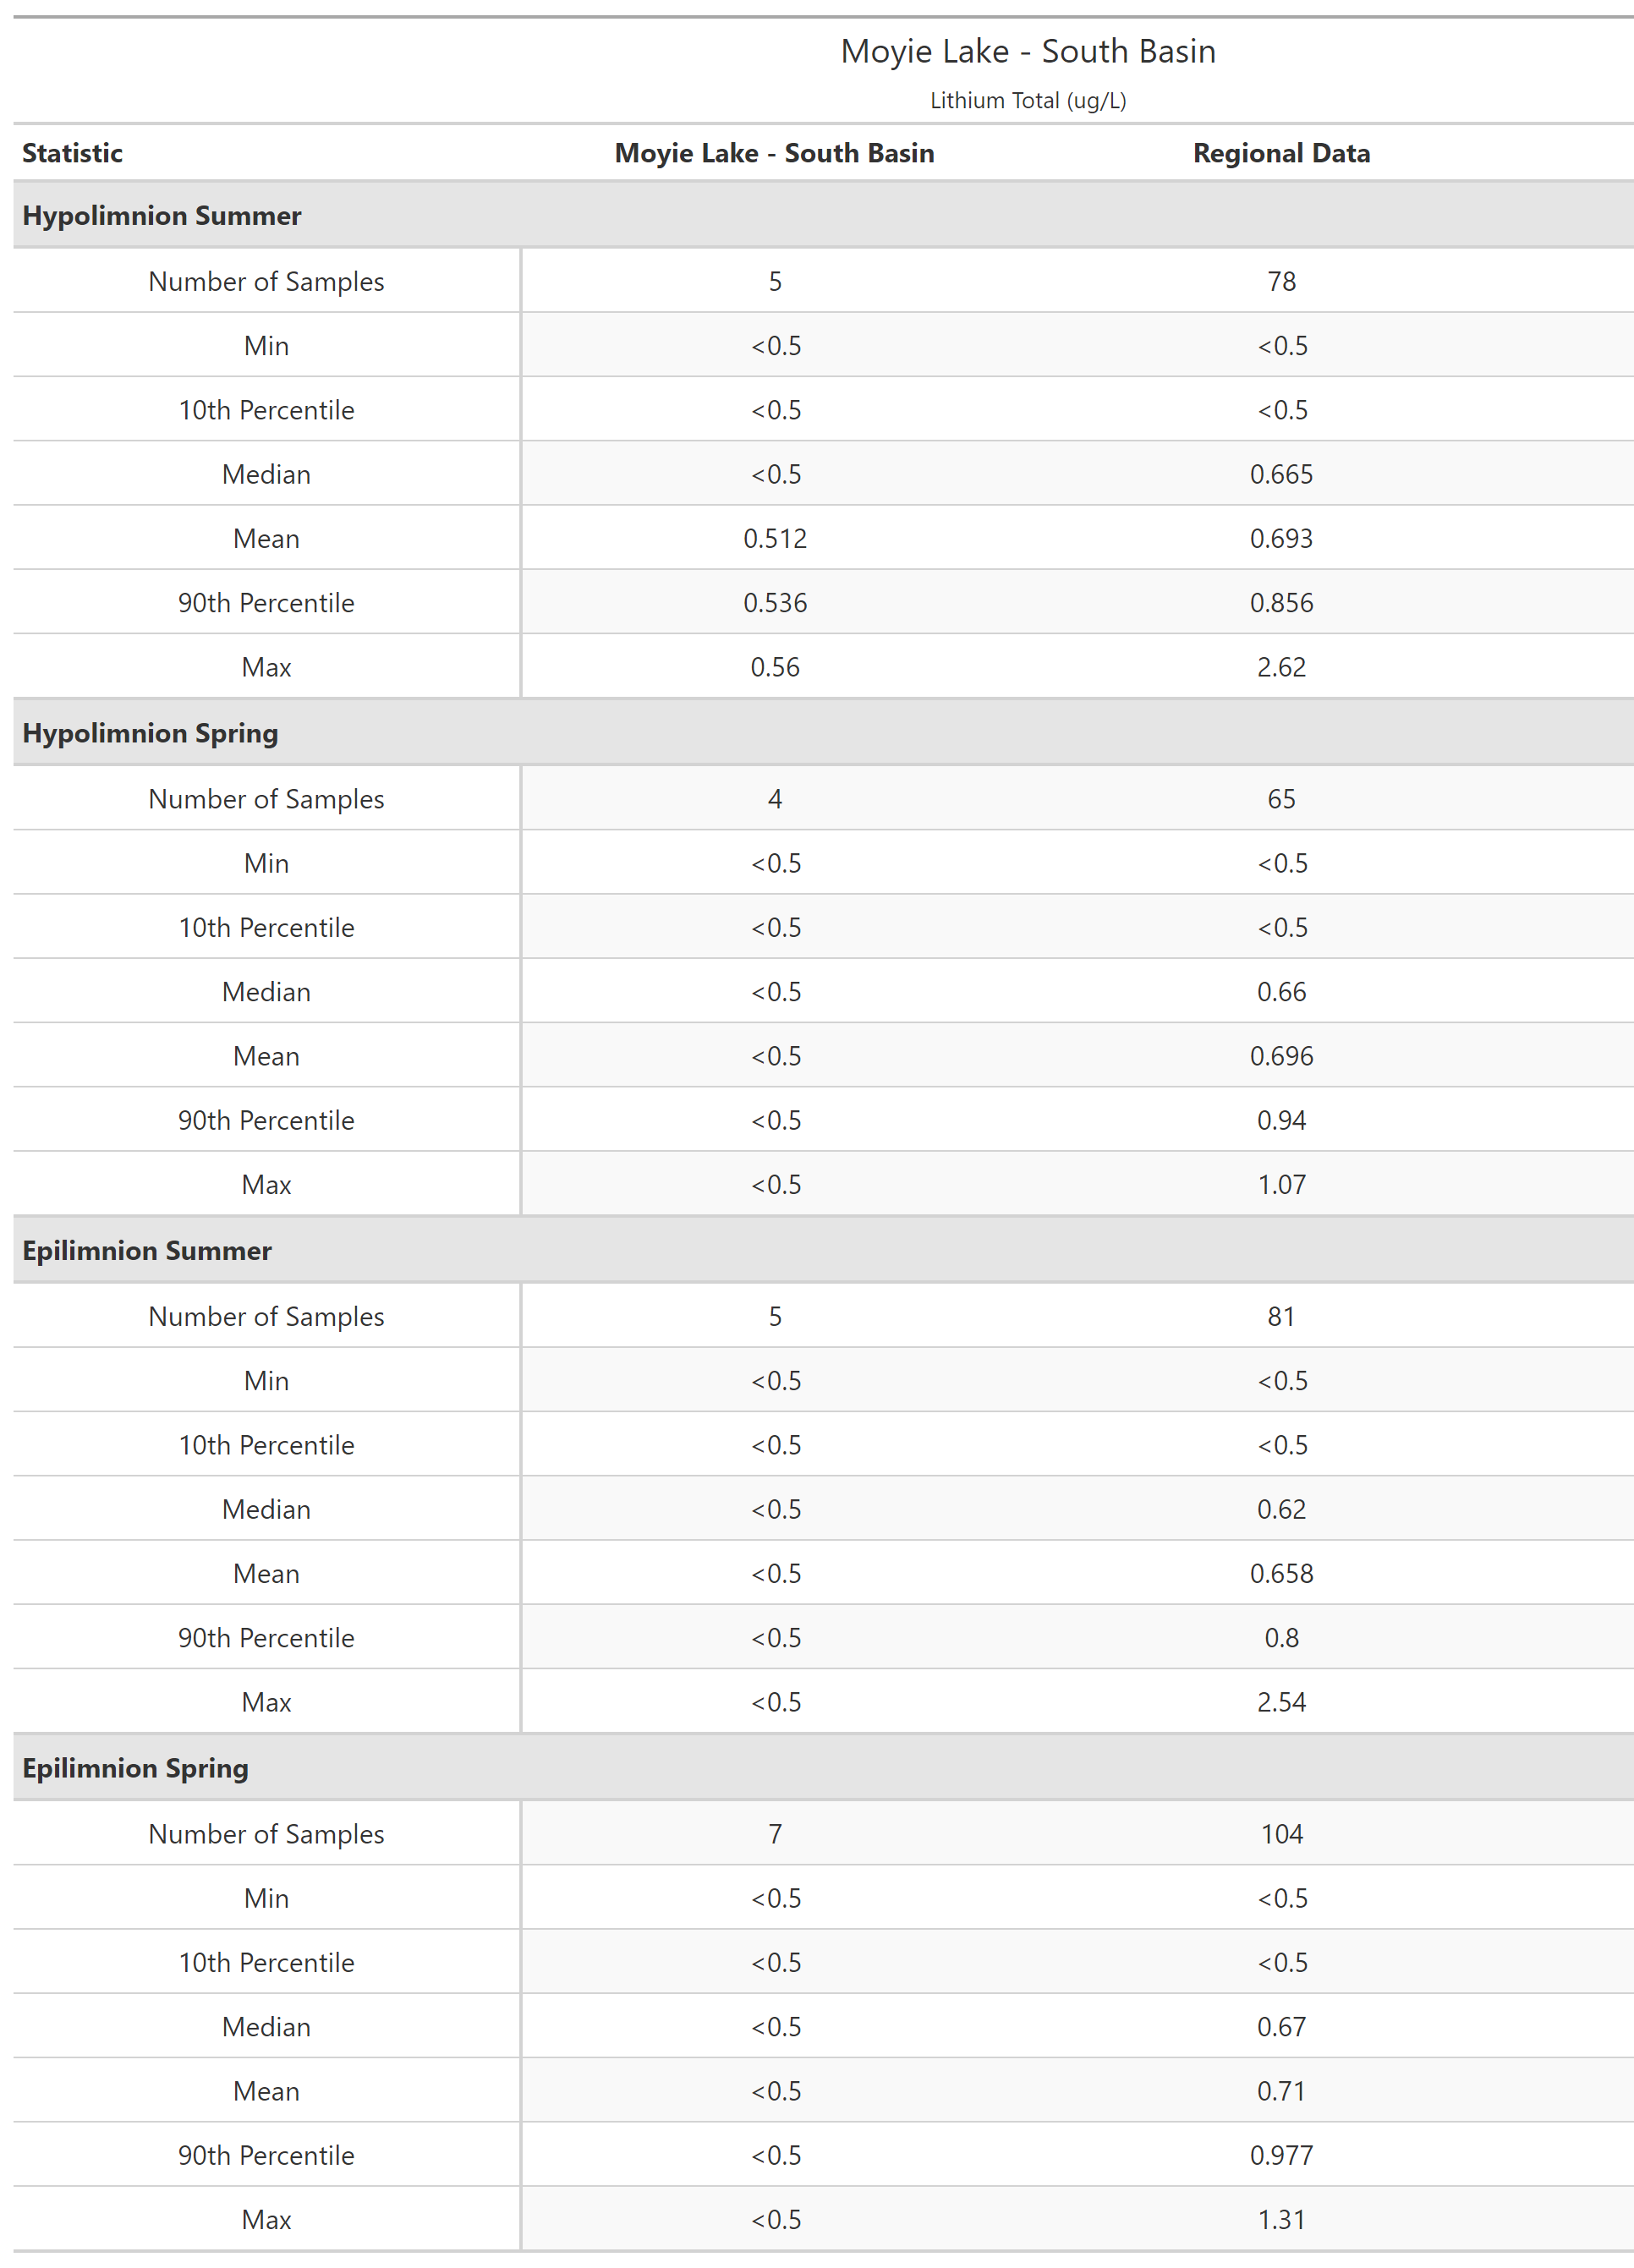 A table of summary statistics for Lithium Total with comparison to regional data